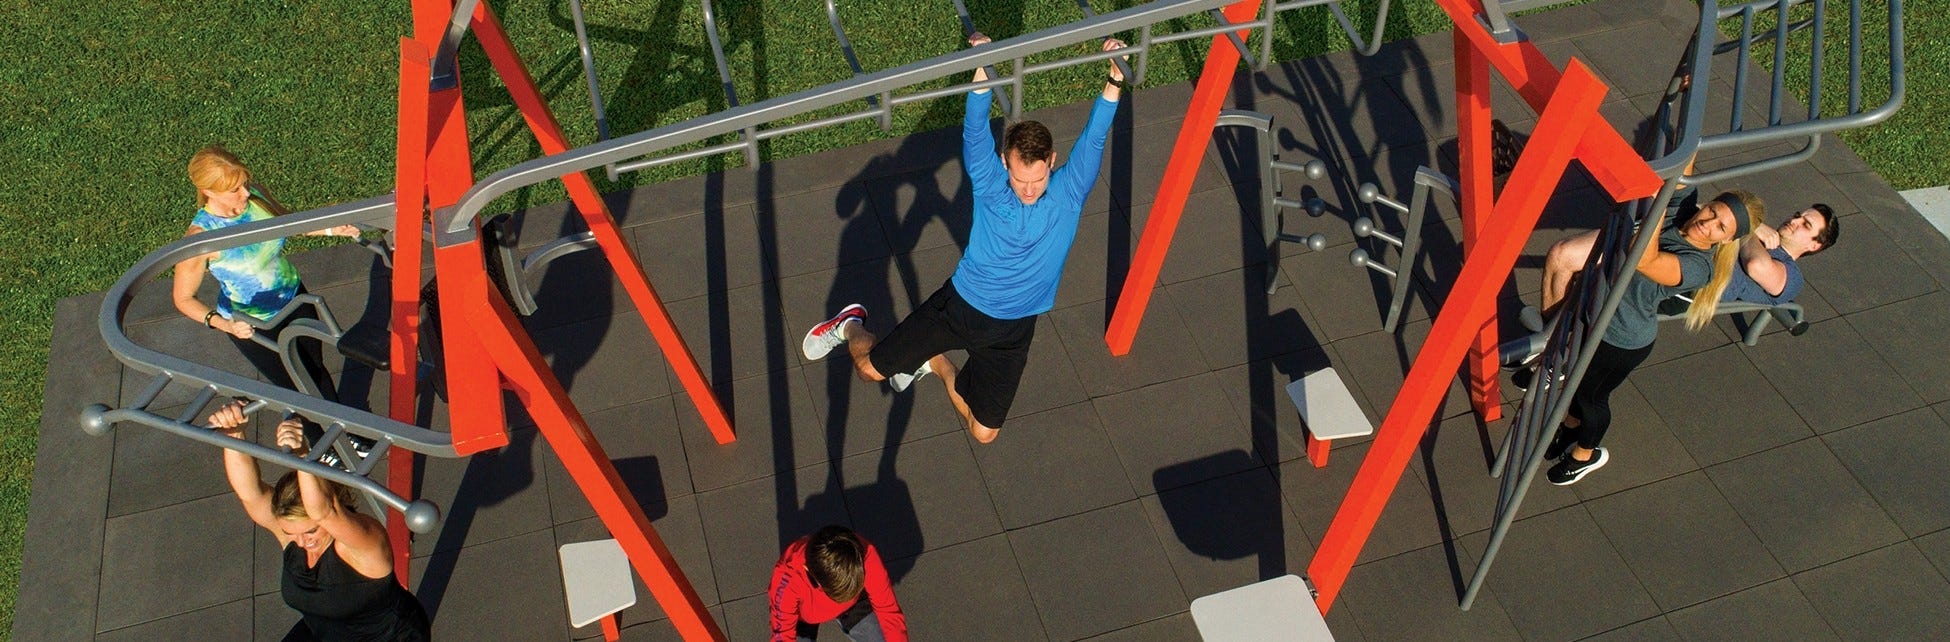 Five Reasons Colleges Make Outdoor Fitness Part of Campus Recreation